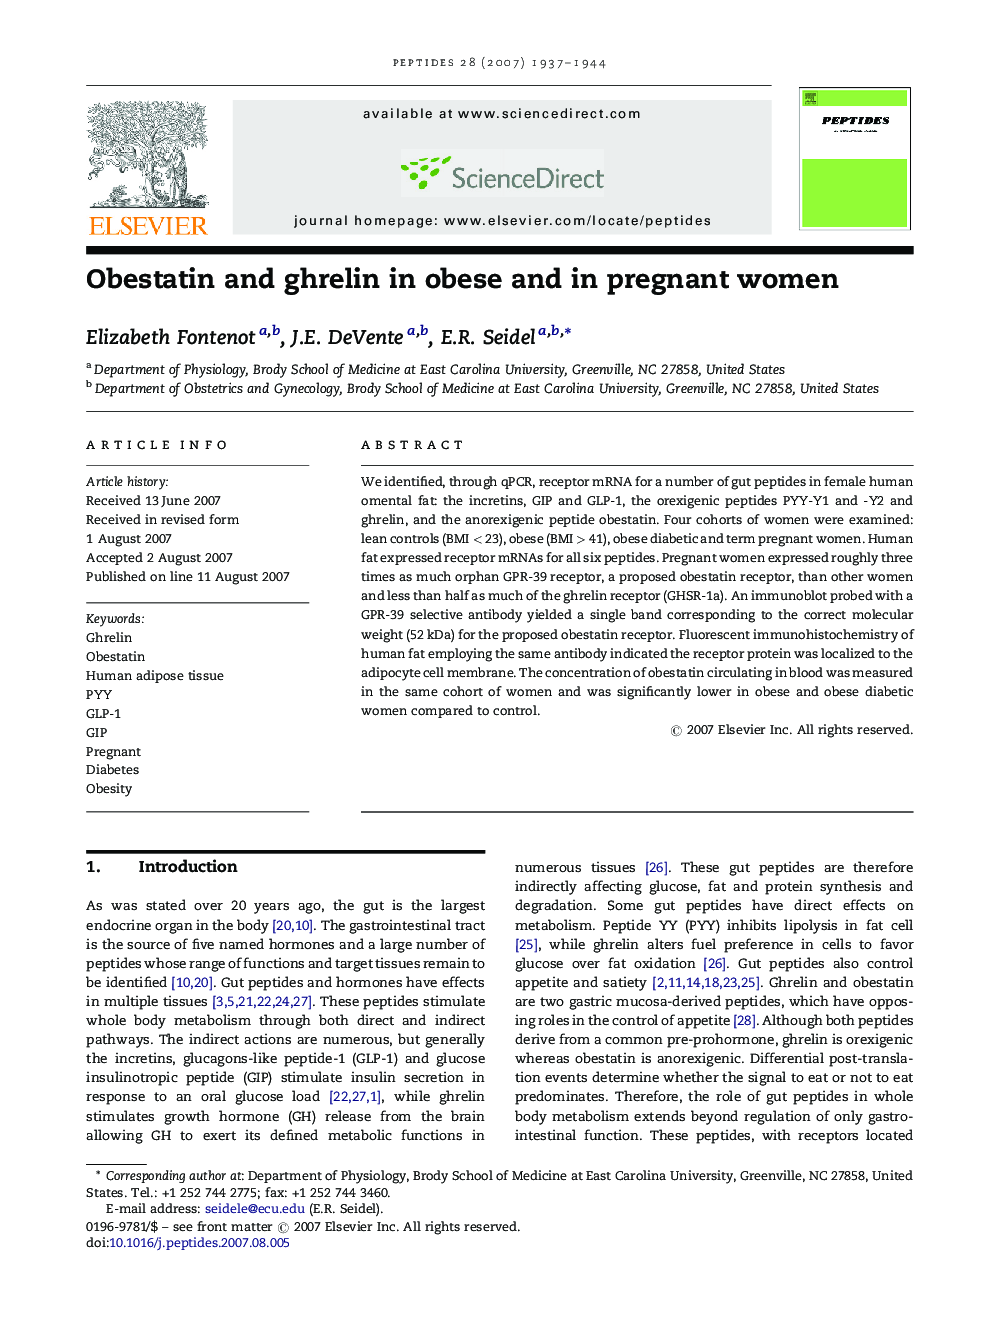 Obestatin and ghrelin in obese and in pregnant women